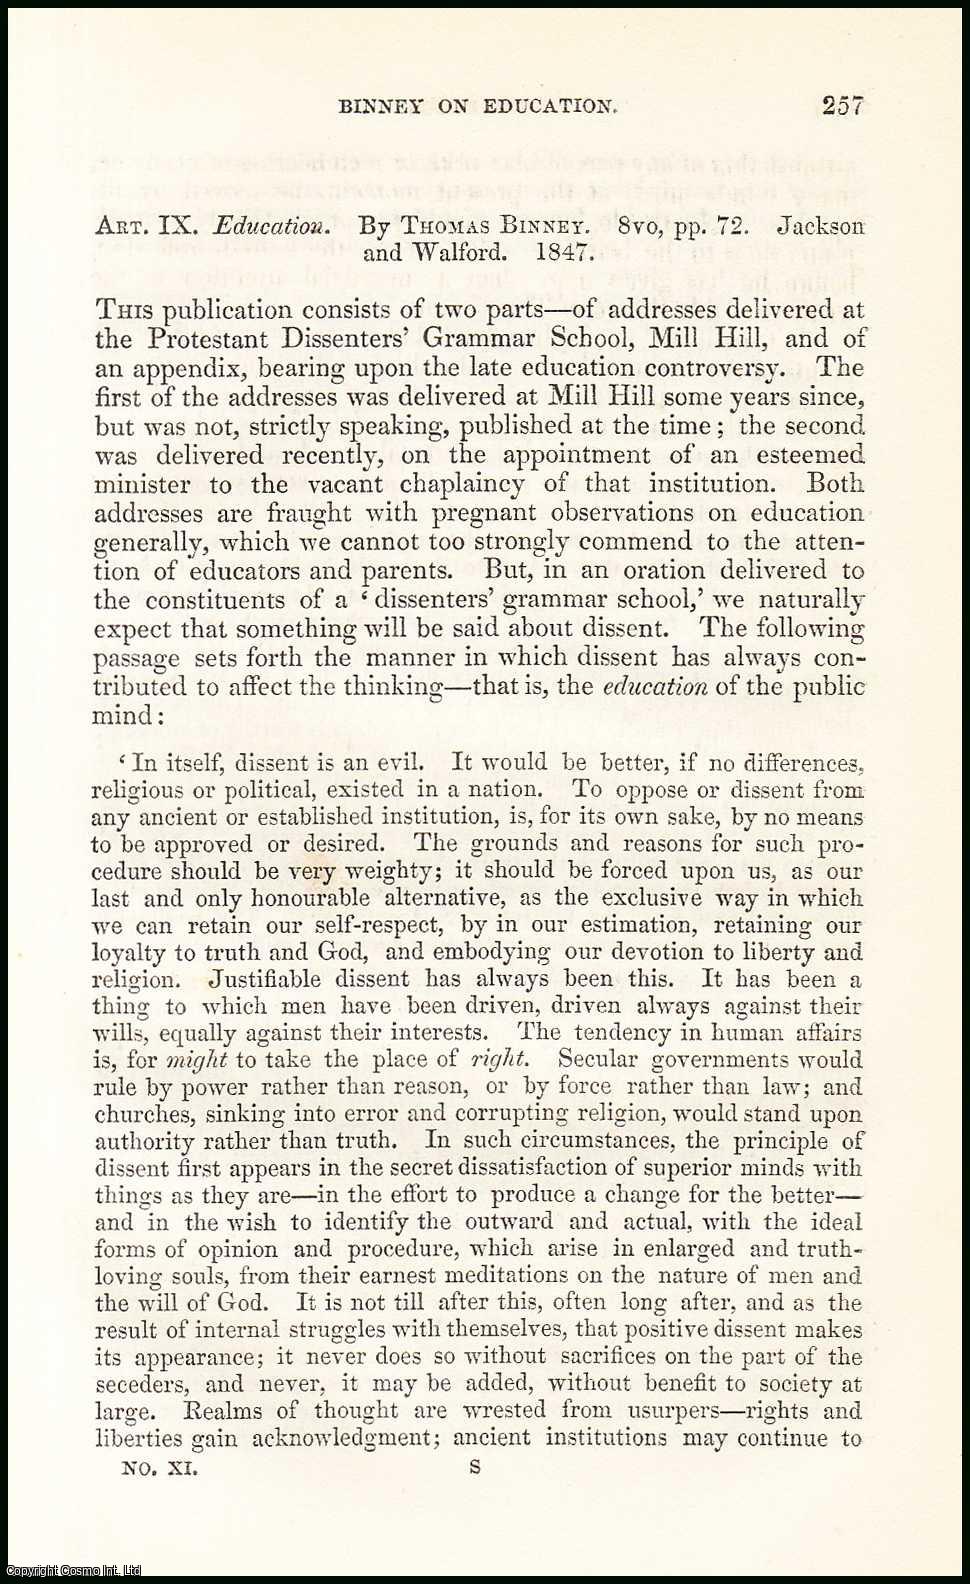 Robert Vaughan - Thomas Binney on Education. A rare original article from the British Quarterly Review, 1847.